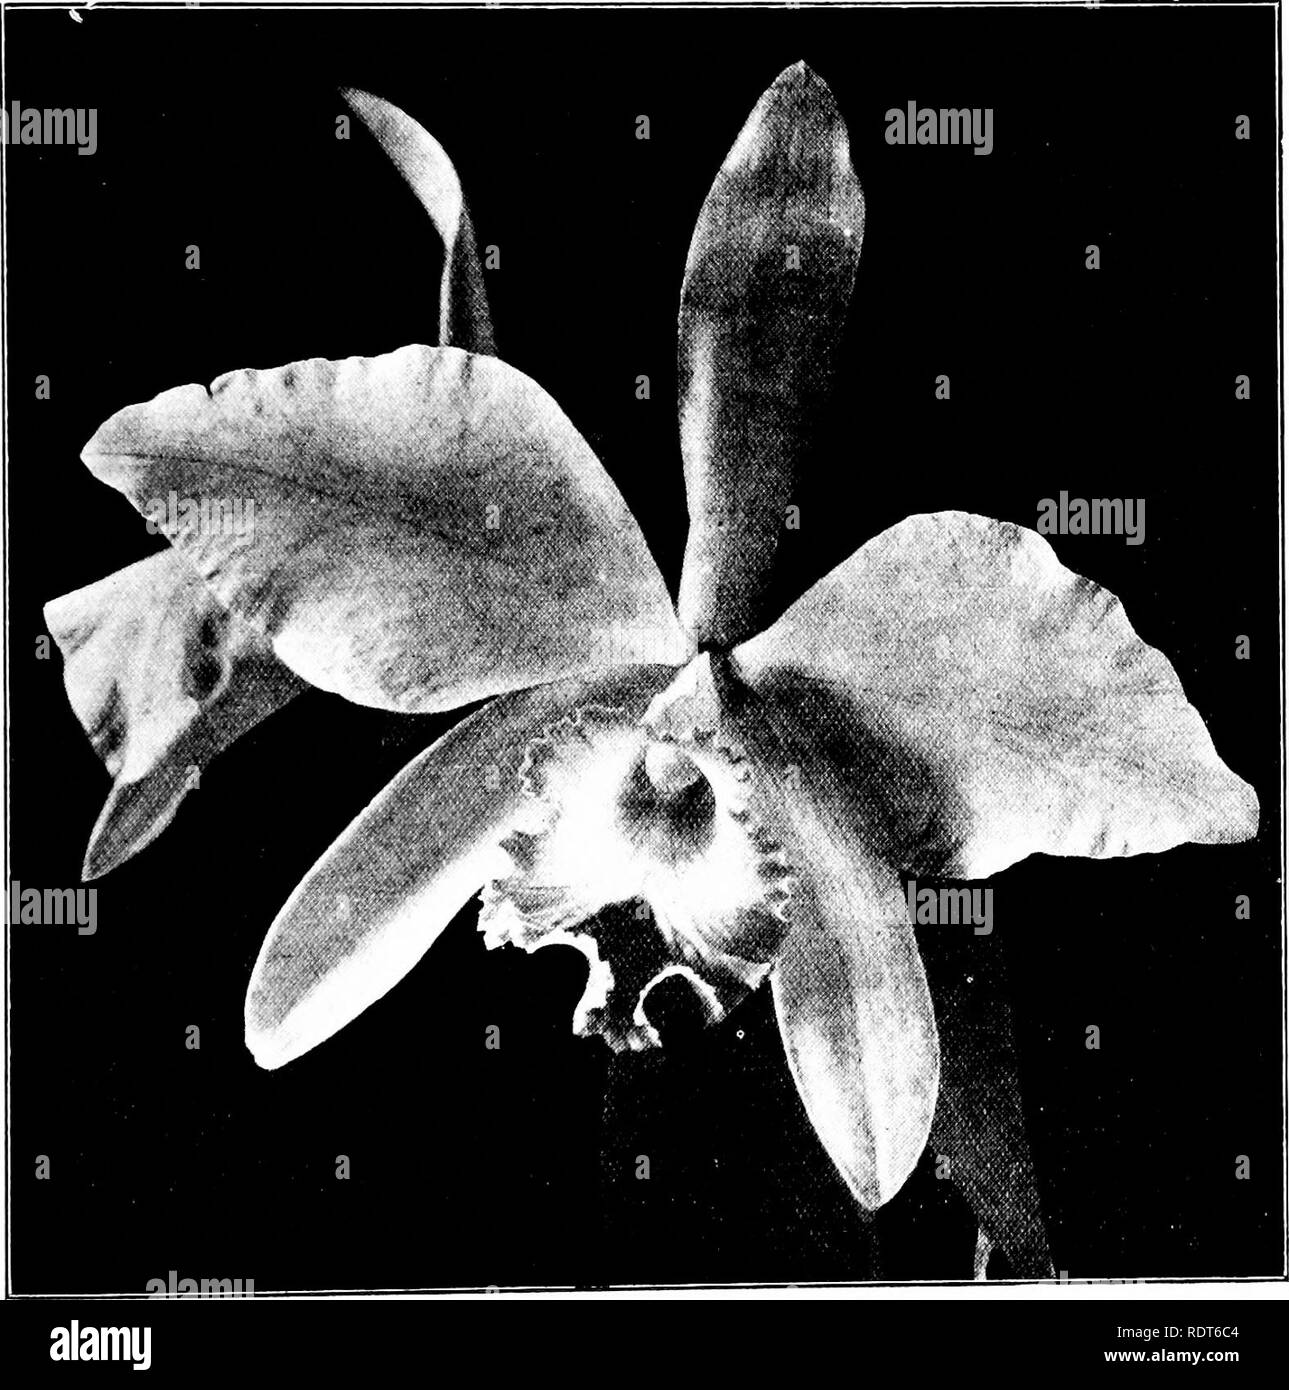 . The orchid stud-book: an enumeration of hybrid orchids of artificial origin, with their parents, raisers, date of first flowering, references to descriptions and figures, and synonymy. With an historical introduction and 120 figures and a chapter on hybridising and raising orchids from seed. Orchids. Part II. Suppl.] THE ORCHID STUD-BOOK. 277 L.-c. x (unnamed), Rev.H. Beige, 1907, 211.—Peeters. L.-c. X Caligula, G.C. 1907, ii. 77 ; O.K. 1907, 245.- Holford. 206a. L.-c. x ronselensis (C. Forbesii 5 x L. cinnabarina), G.C. 1904. ii. 433; O.R. 1905, 21.—Wavrin, 1904. L.-c. x (unnamed), Rev. H.  Stock Photo